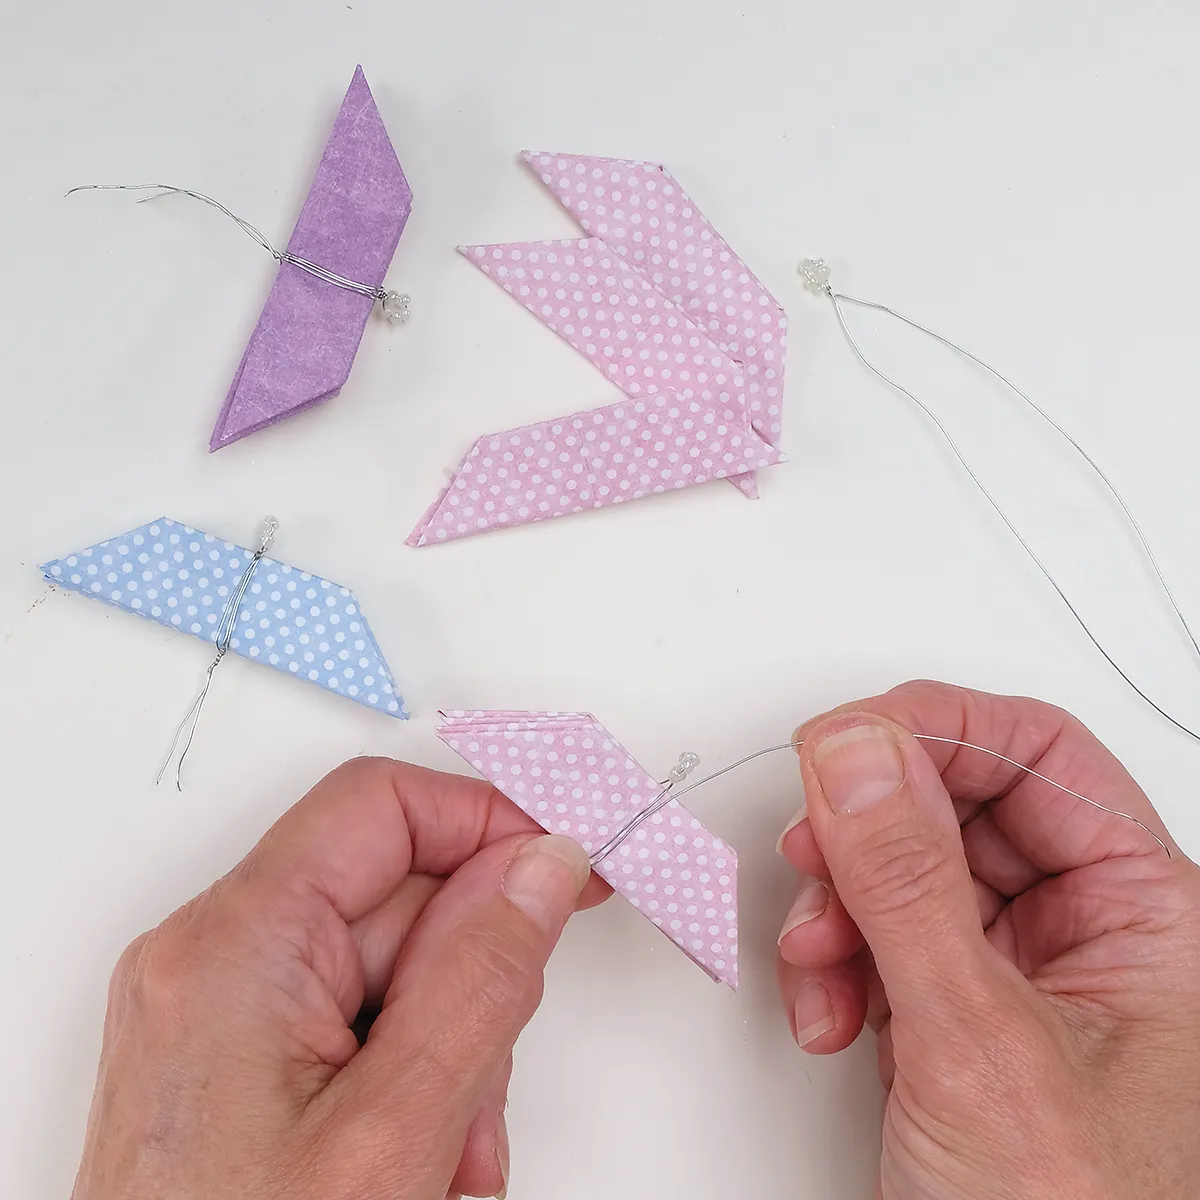 How to make an origami wreath - step 5